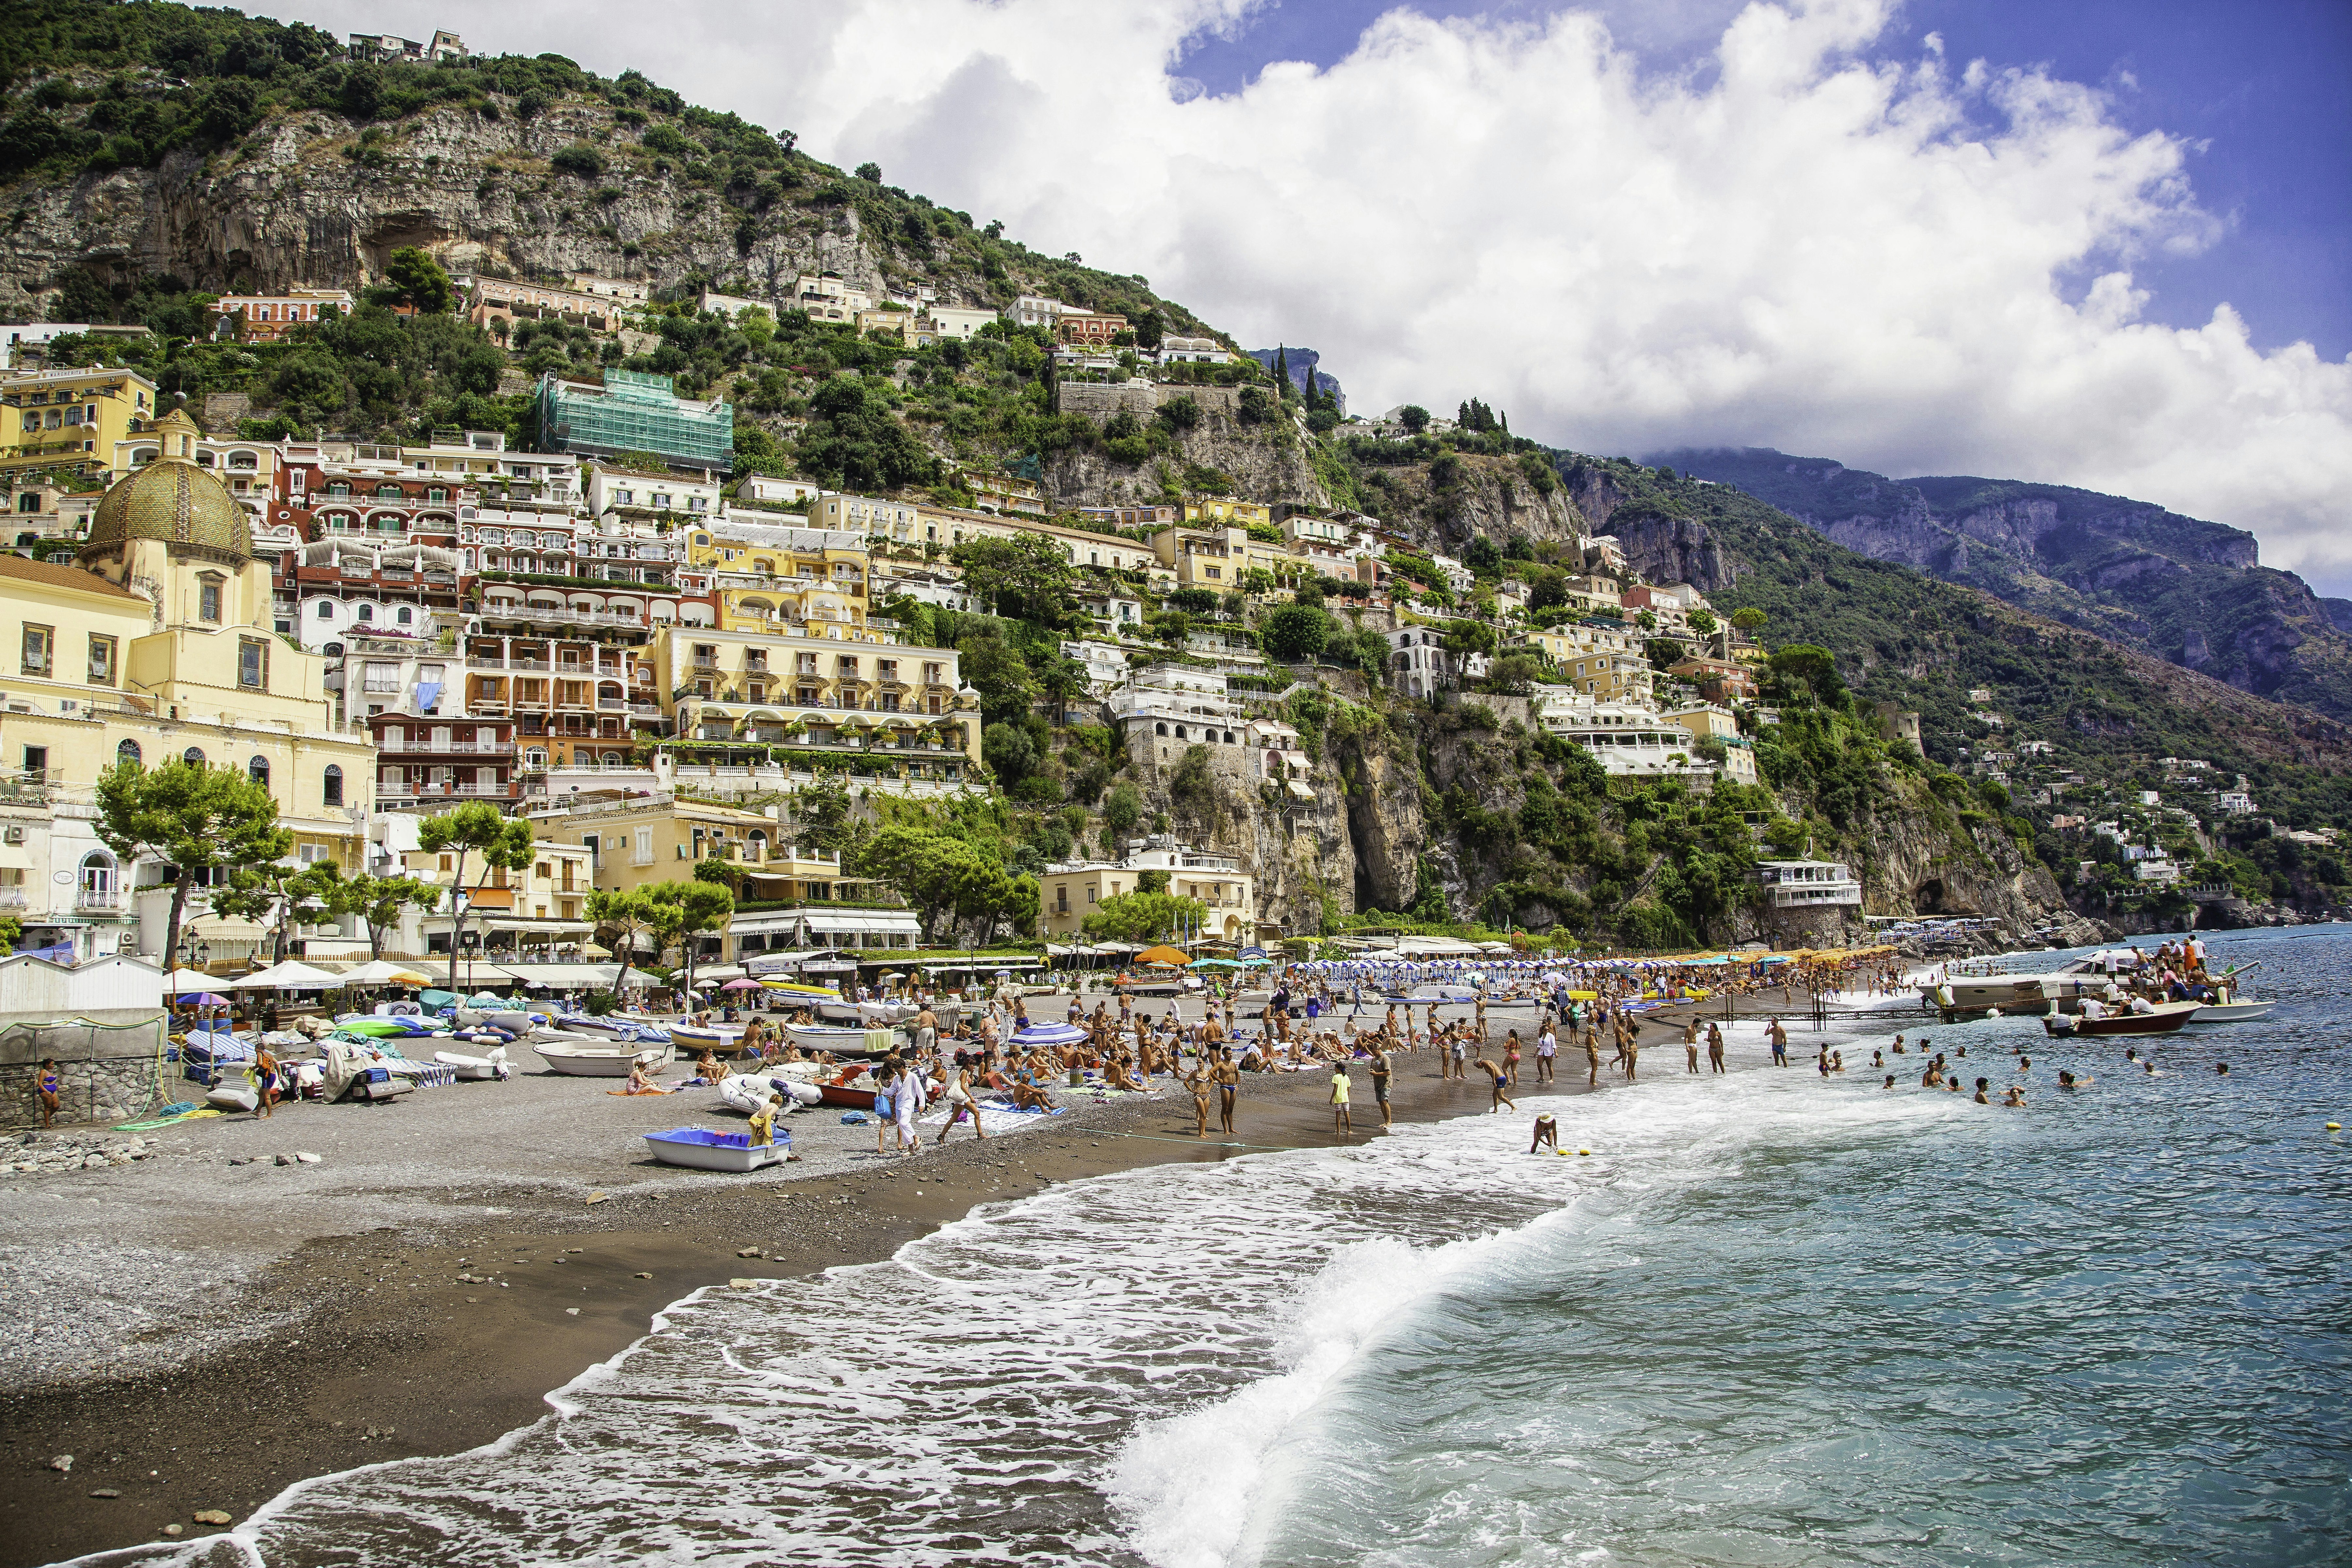 A view of the beach in Positano, on the Amalfi Coast. The beach is crowded with people, and colourful buildings climb the rocky hillside behind it.